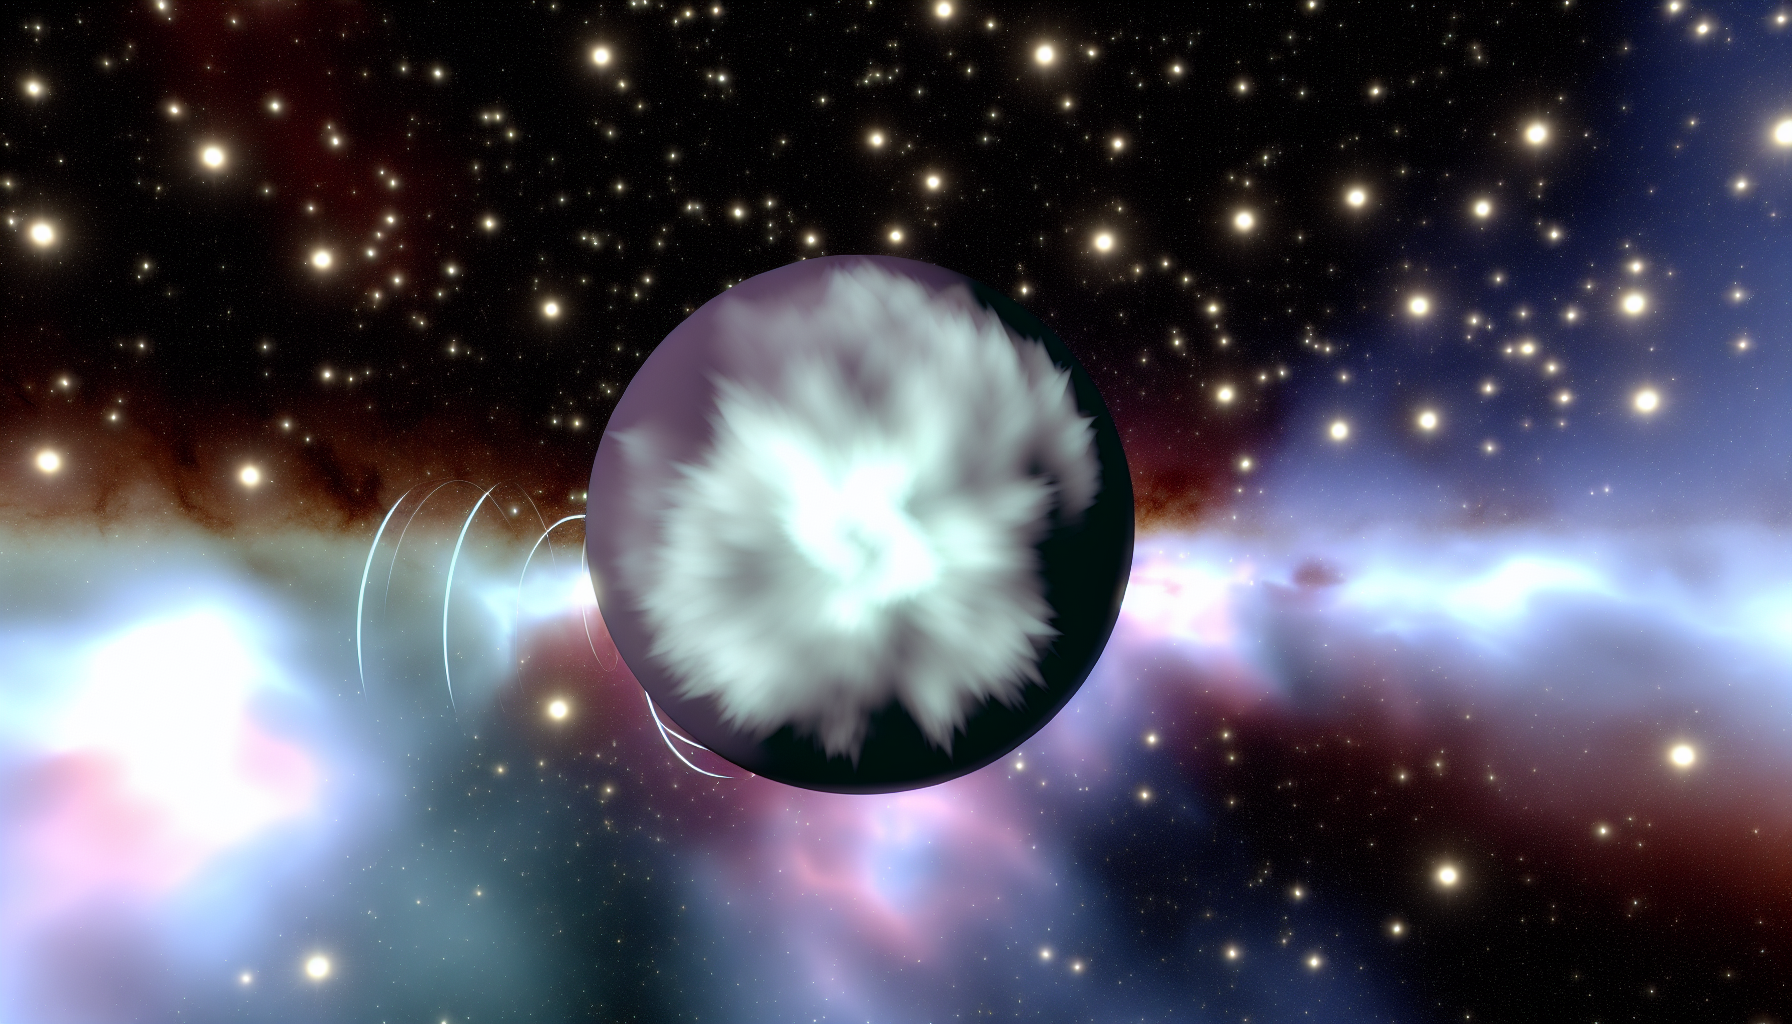 Visualization of high-energy emissions from a neutron star